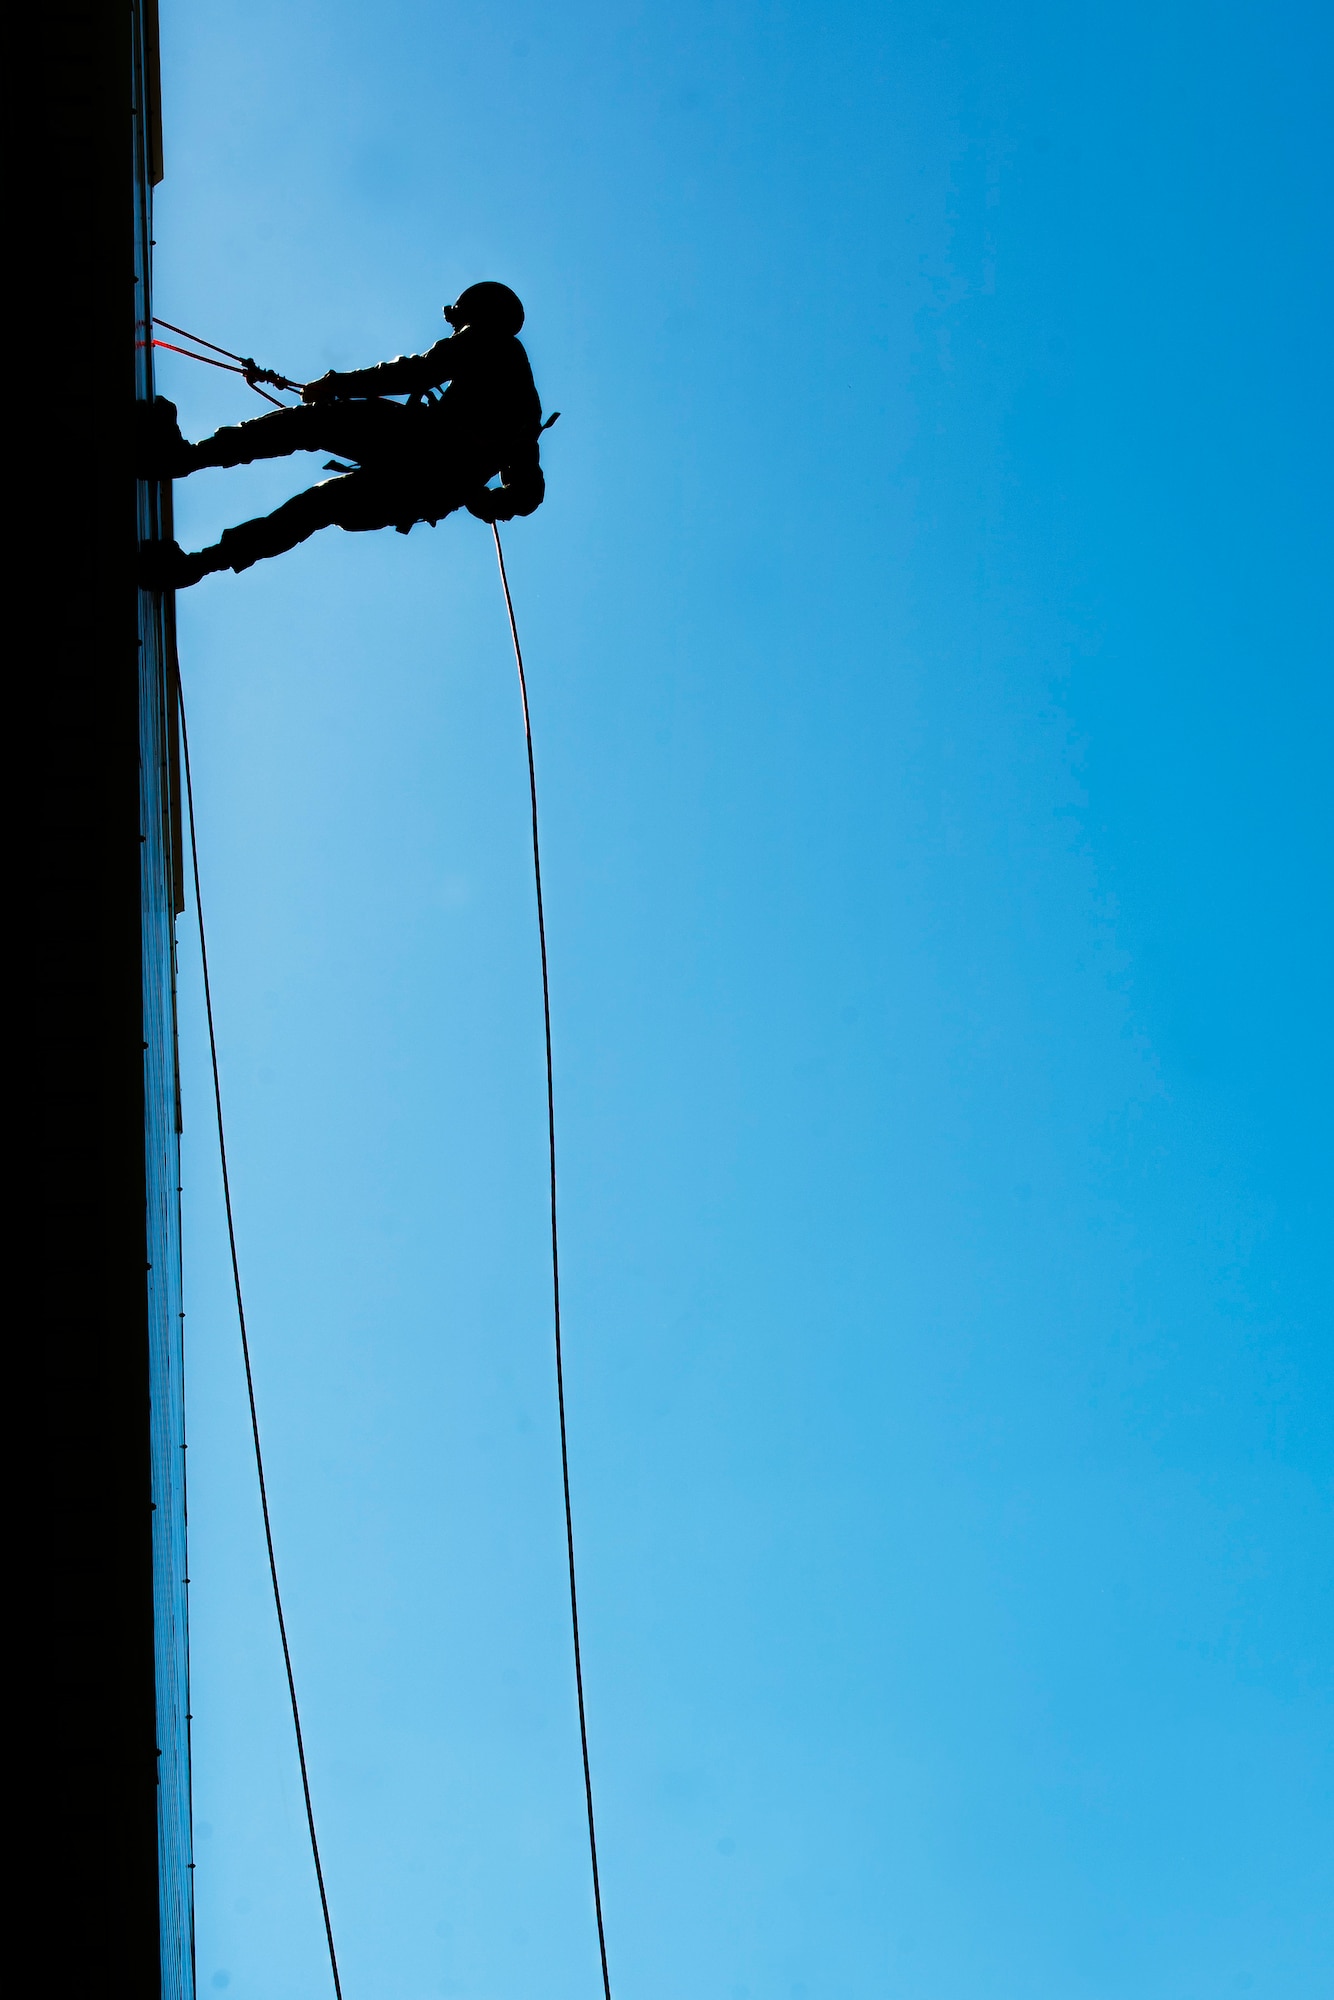 An Airman from the 5th Civil Engineer Squadron rappels down a building during an Expeditionary Training Day at Minot Air Force Base, N.D., June 1, 2017. More than 60 CE Airmen participated in the training, which consisted of an array of deployment readiness tasks. (U.S. Air Force photo/Senior Airman J.T. Armstrong)